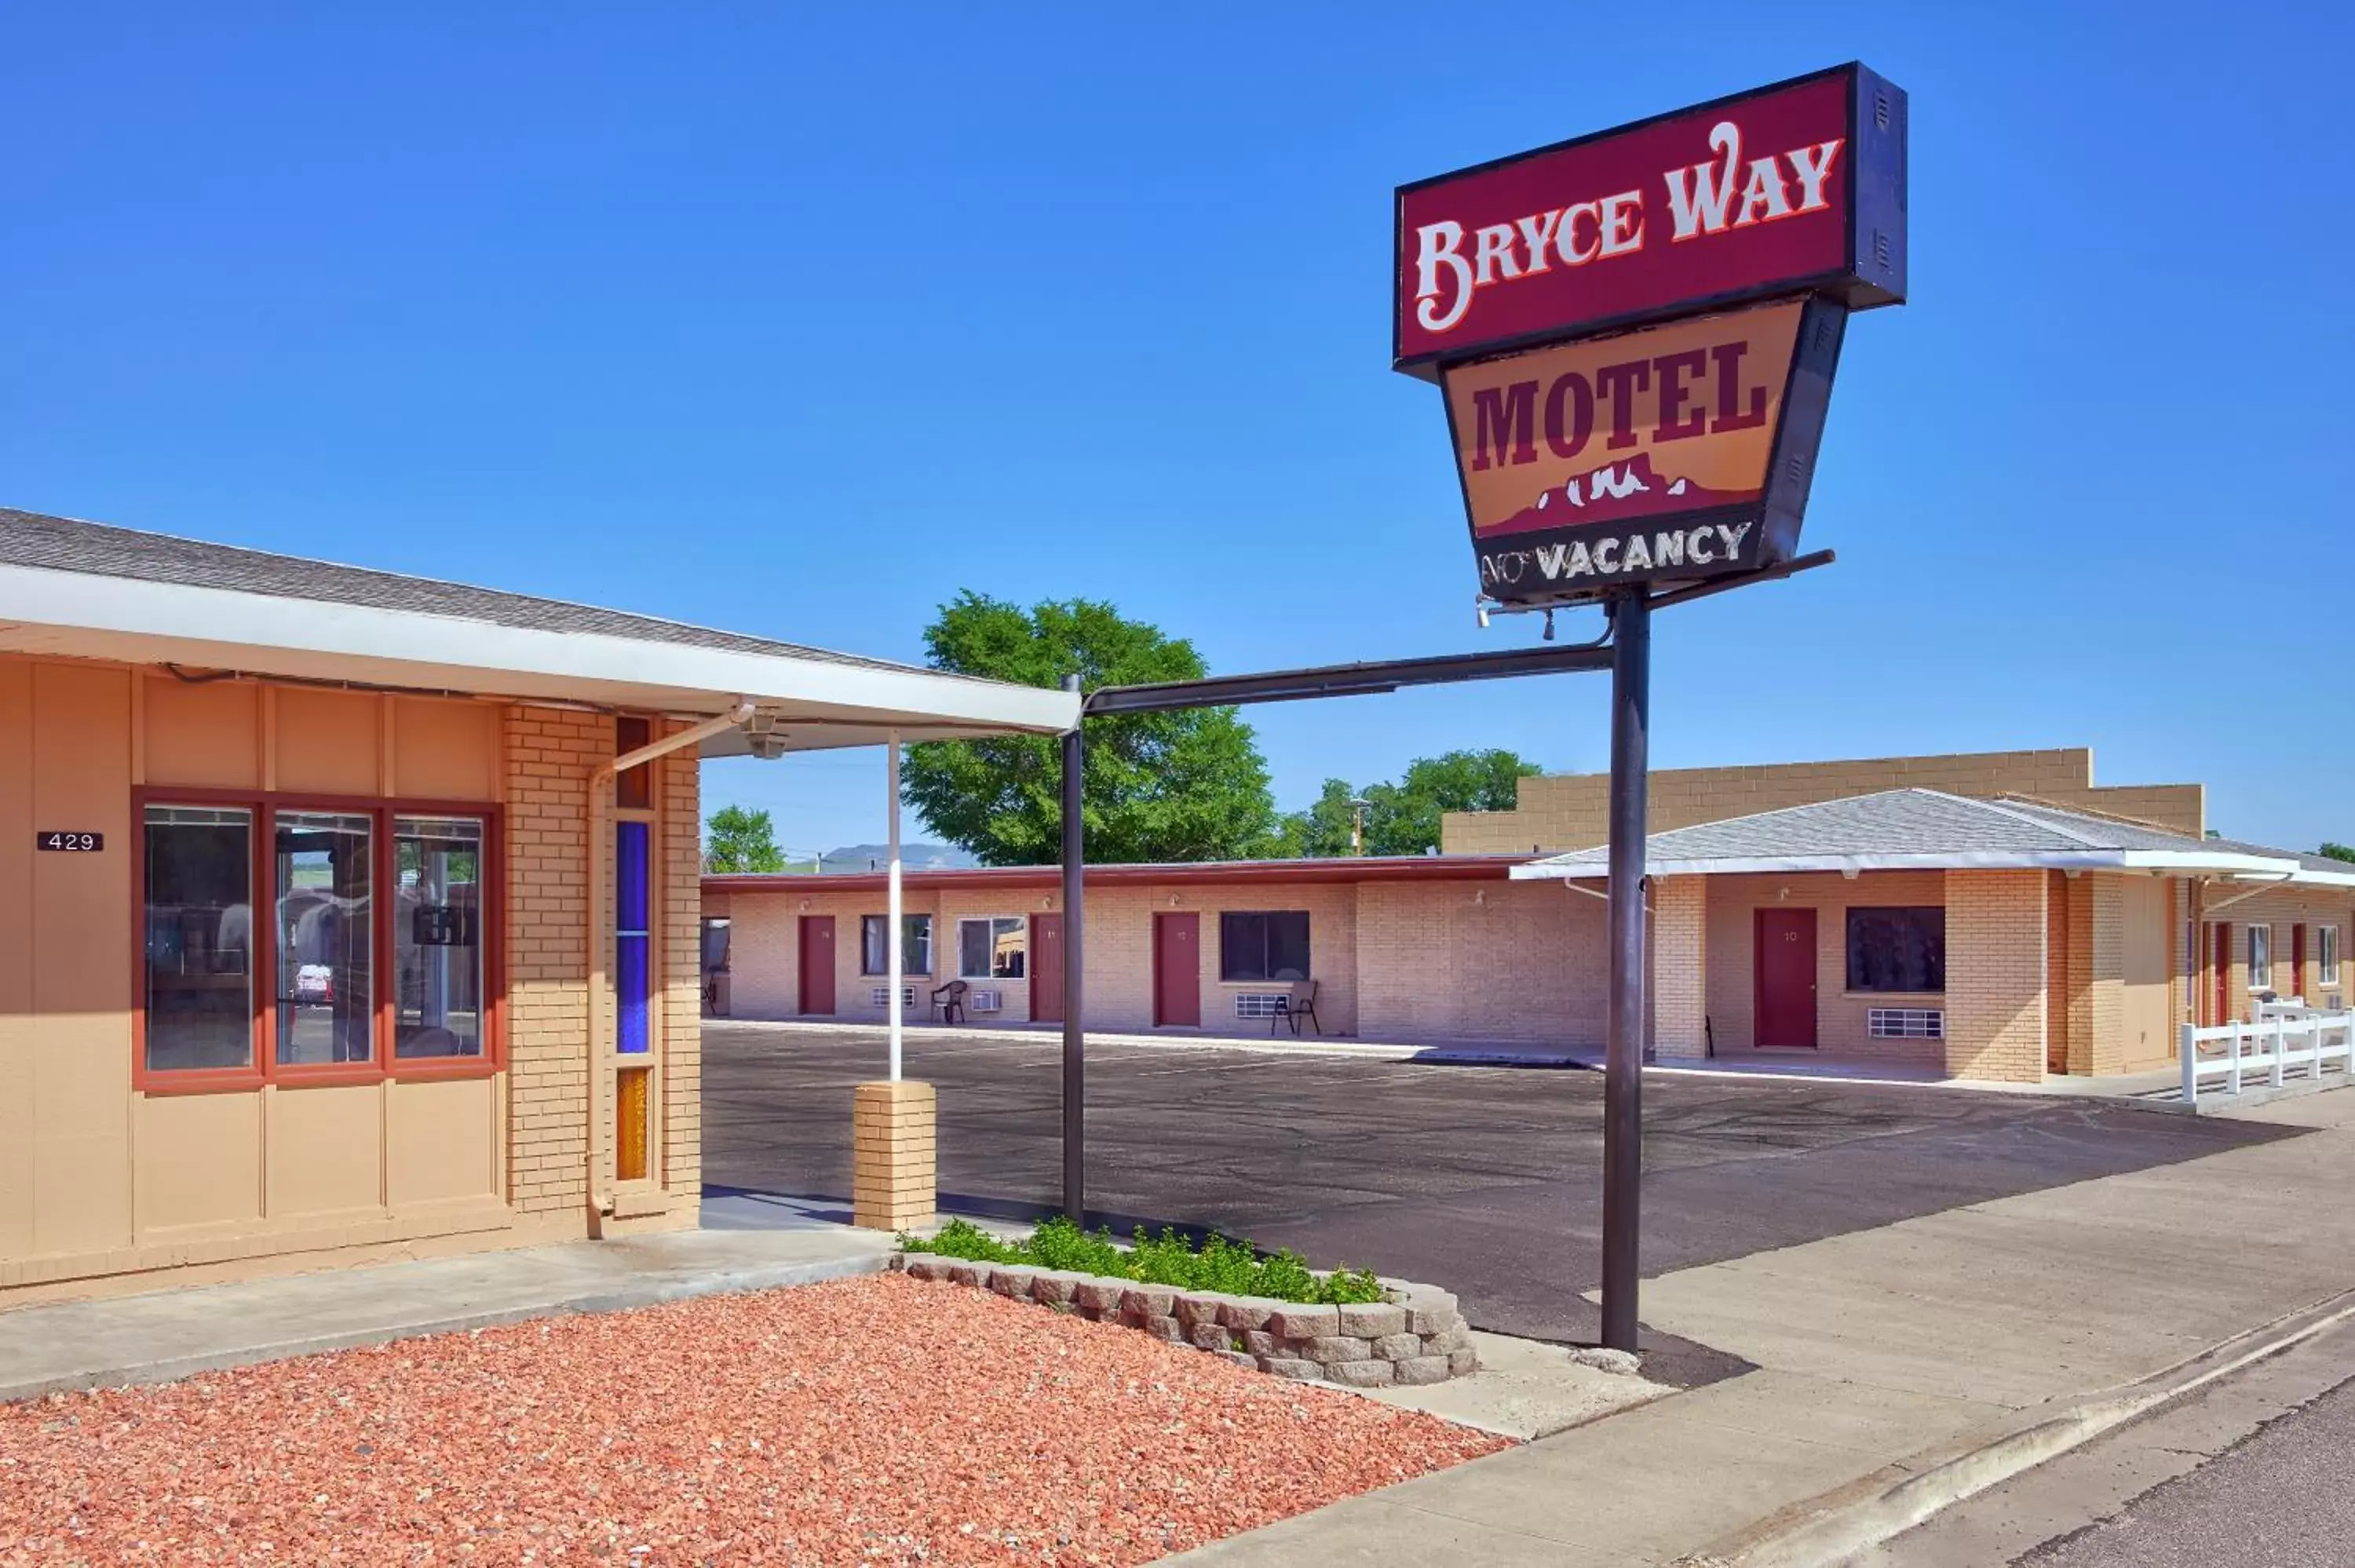 Property Building in Bryce Way Motel